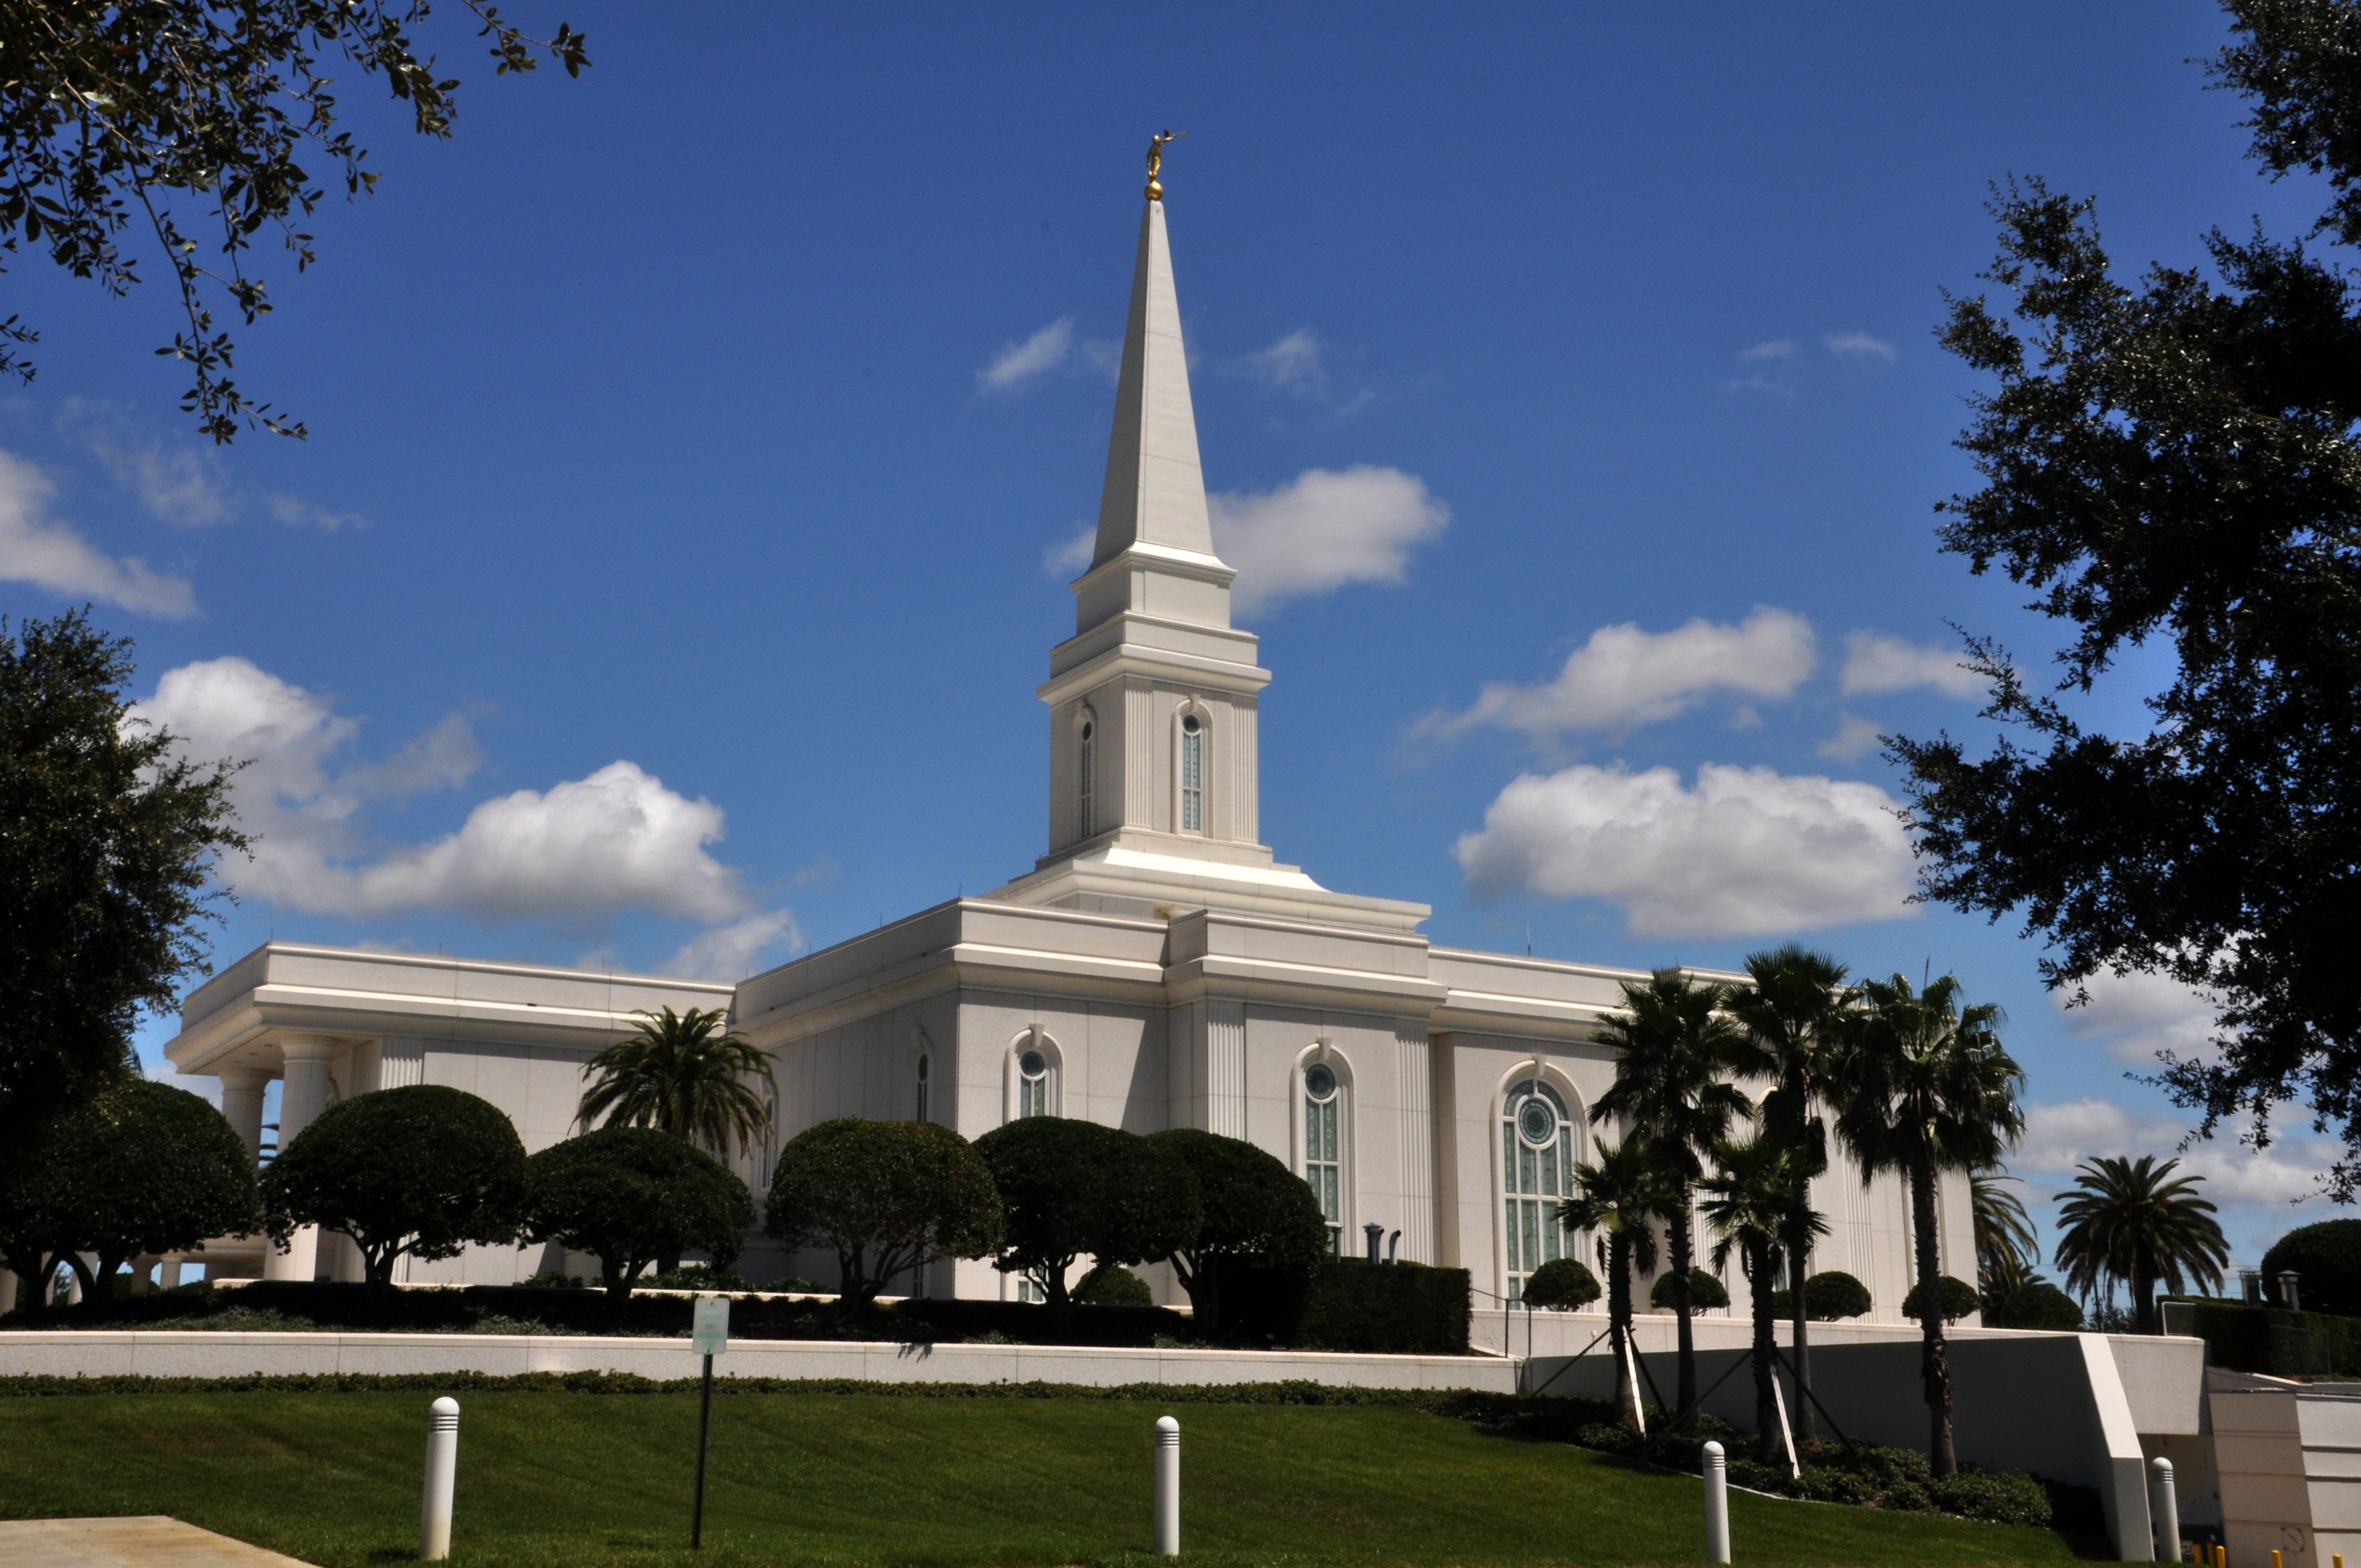 The Orlando Florida Temple and grounds on a sunny day.